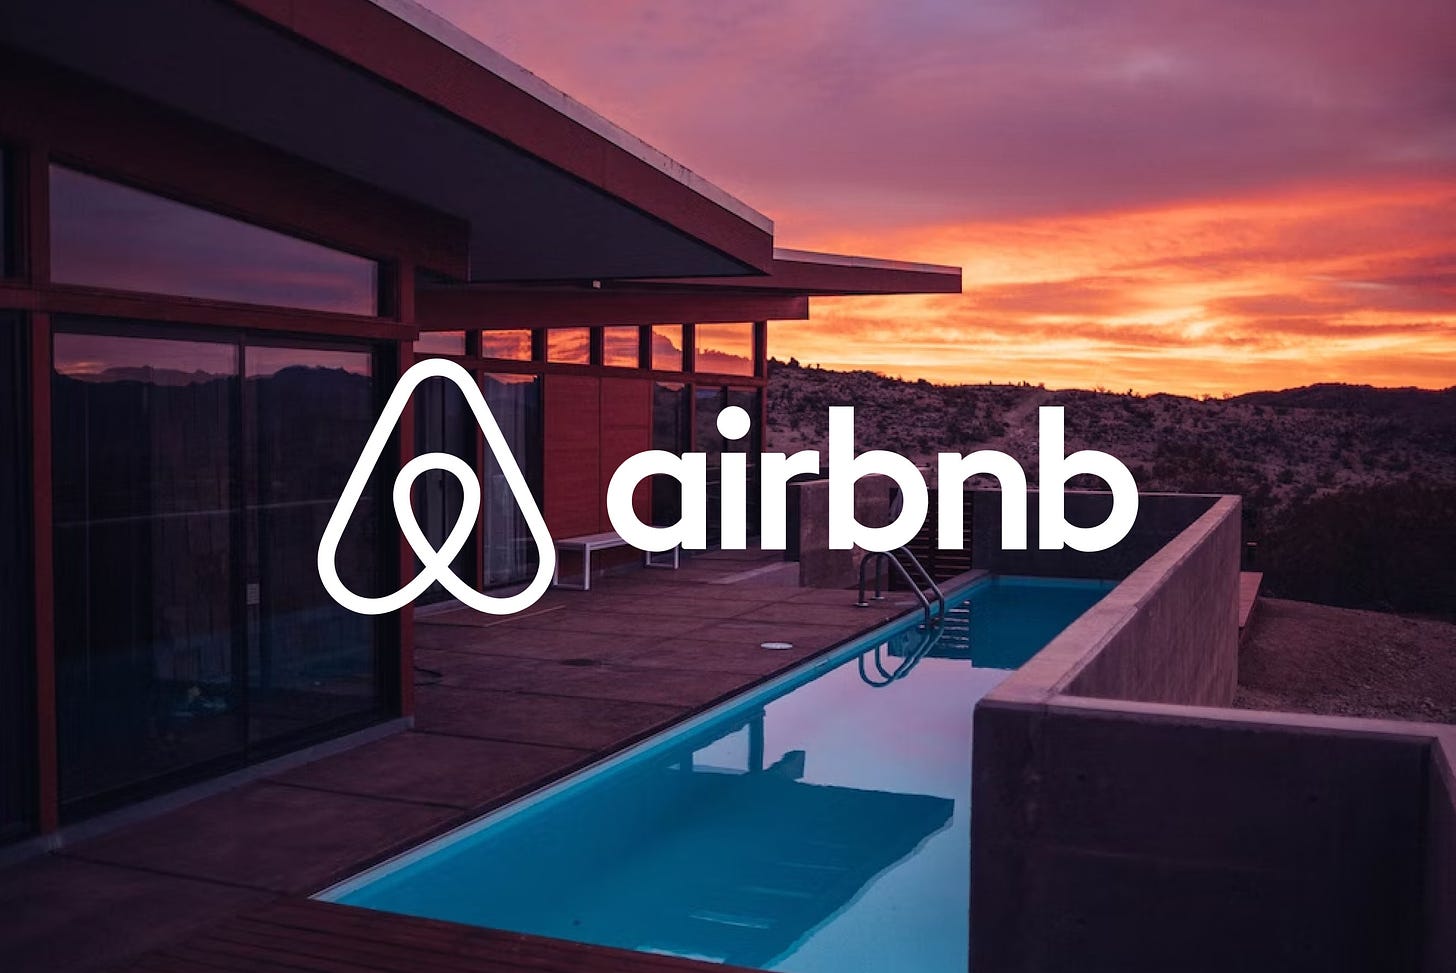 What You Can Learn from Airbnb's Successful Startup | SPINX Digital